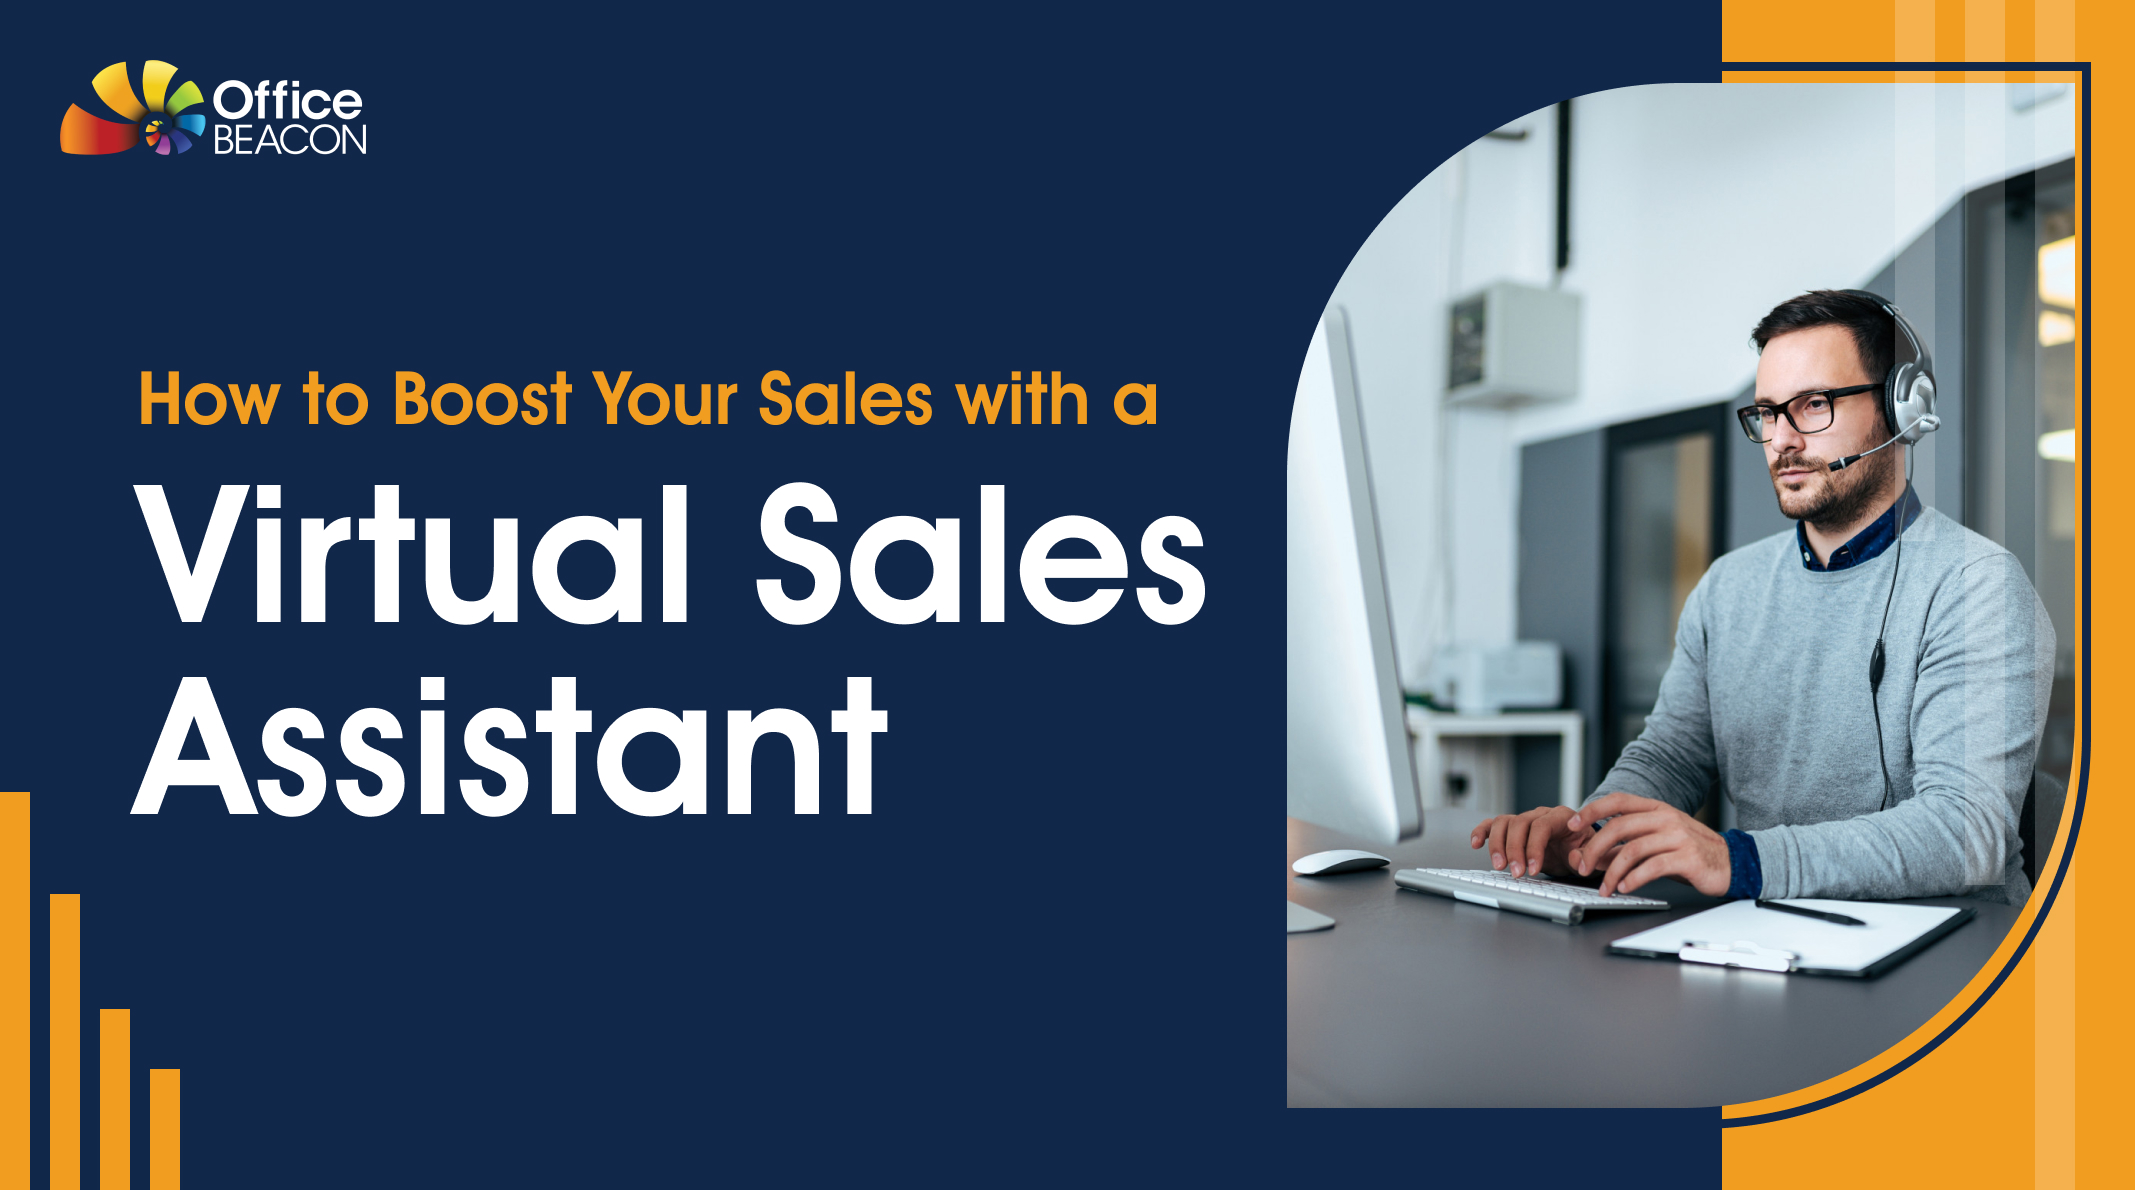 How to Boost Your Sales with a Virtual Sales Assistant